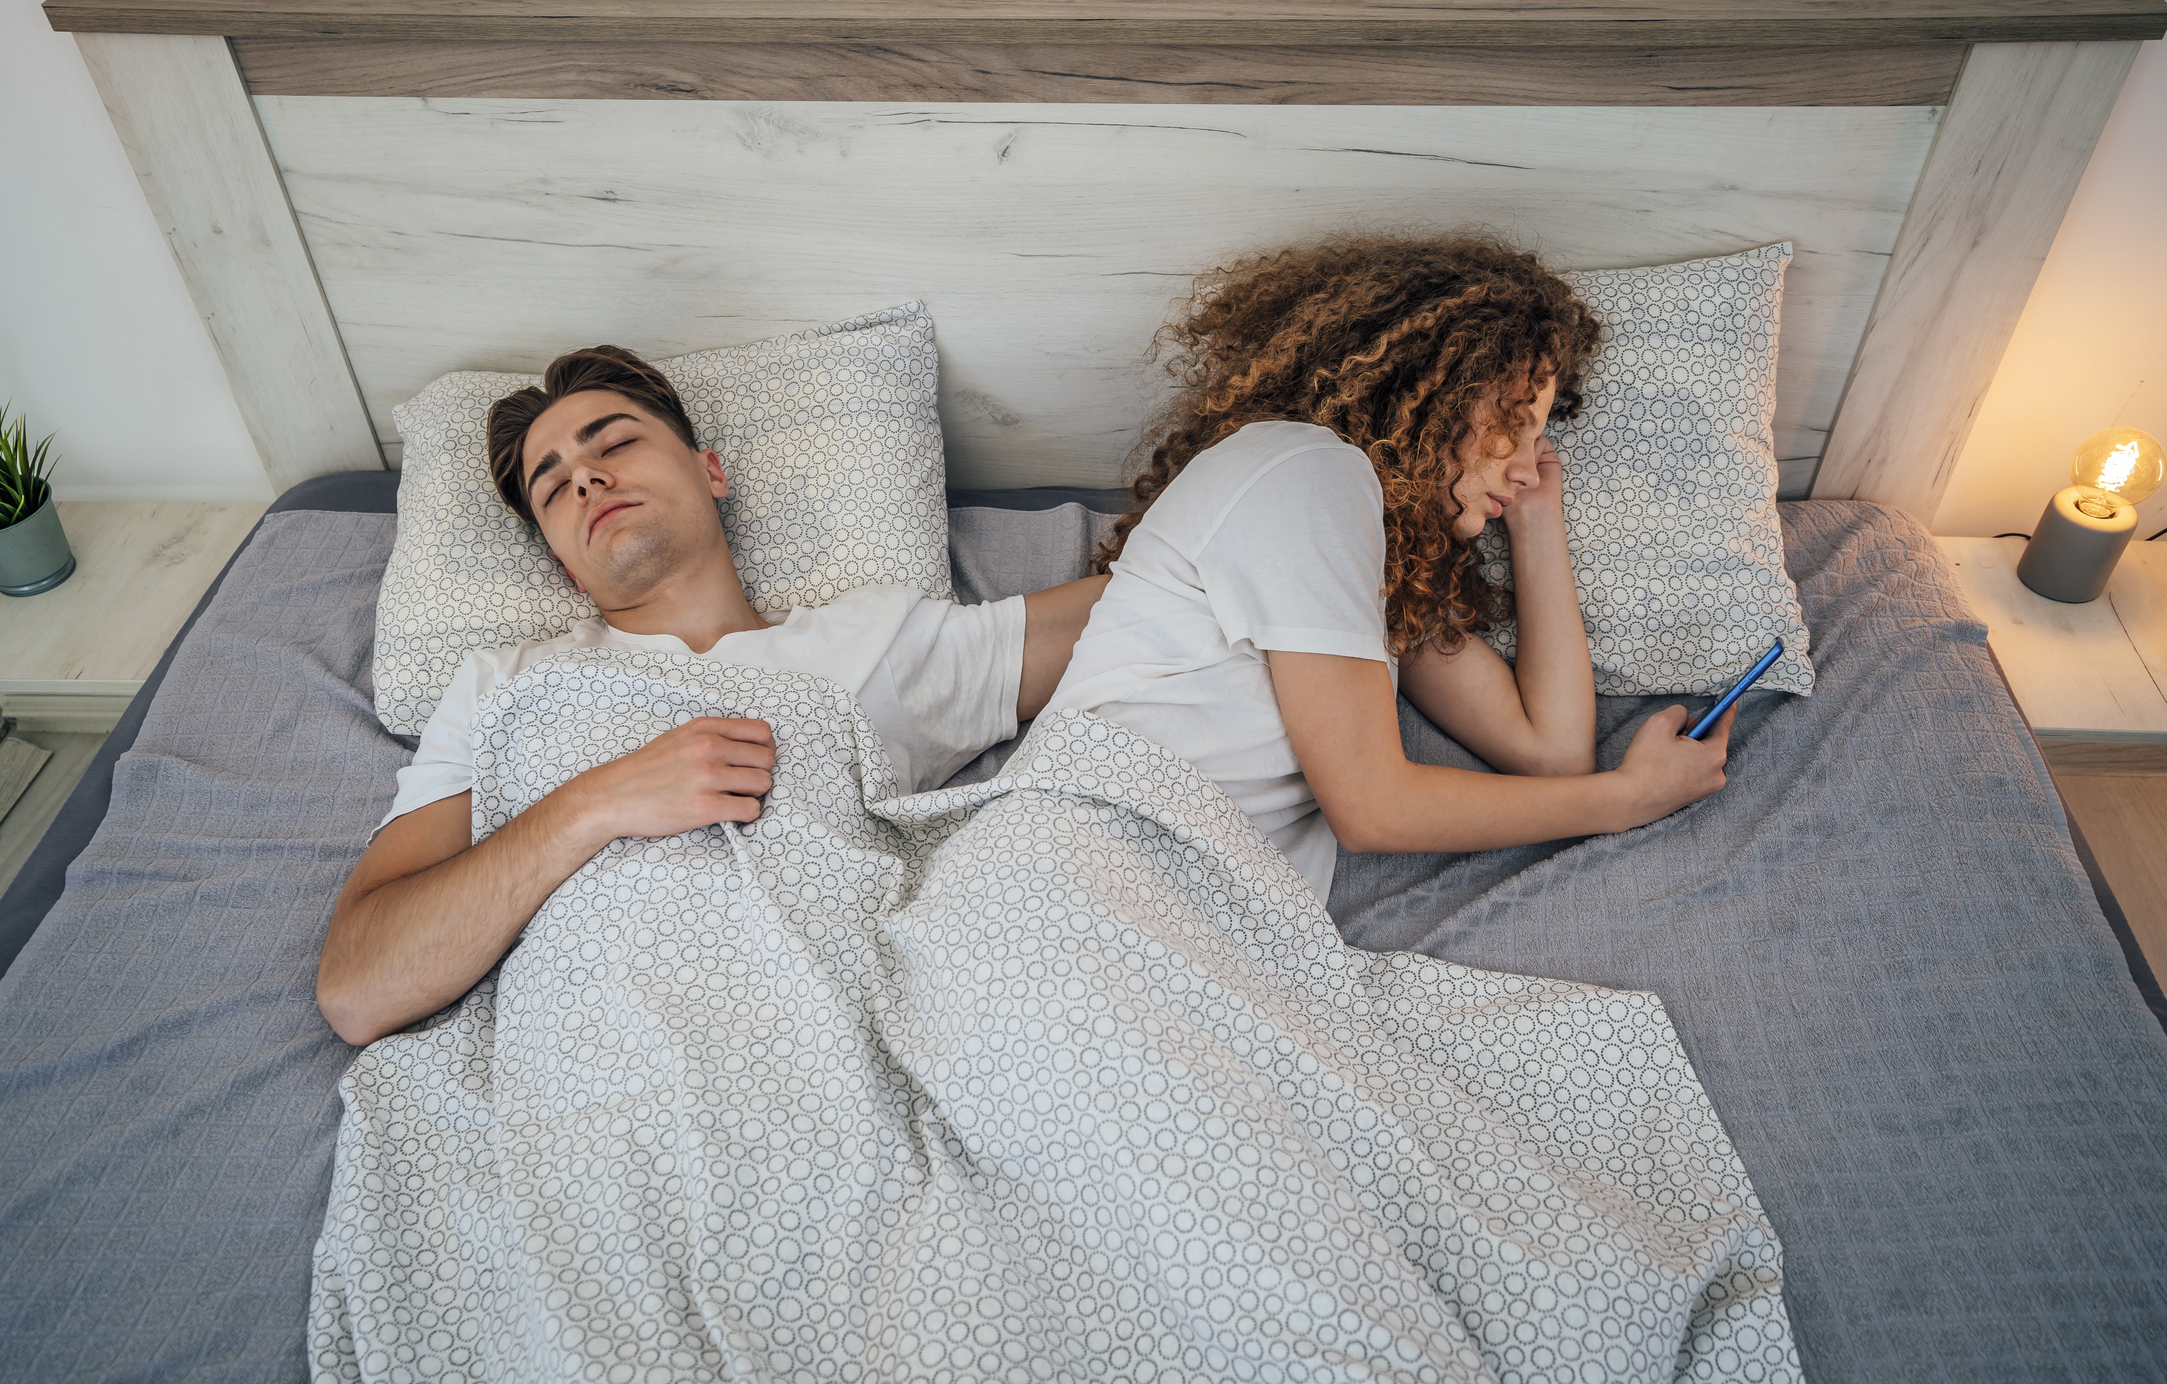 A woman facing away from a man in bed and looking at her phone